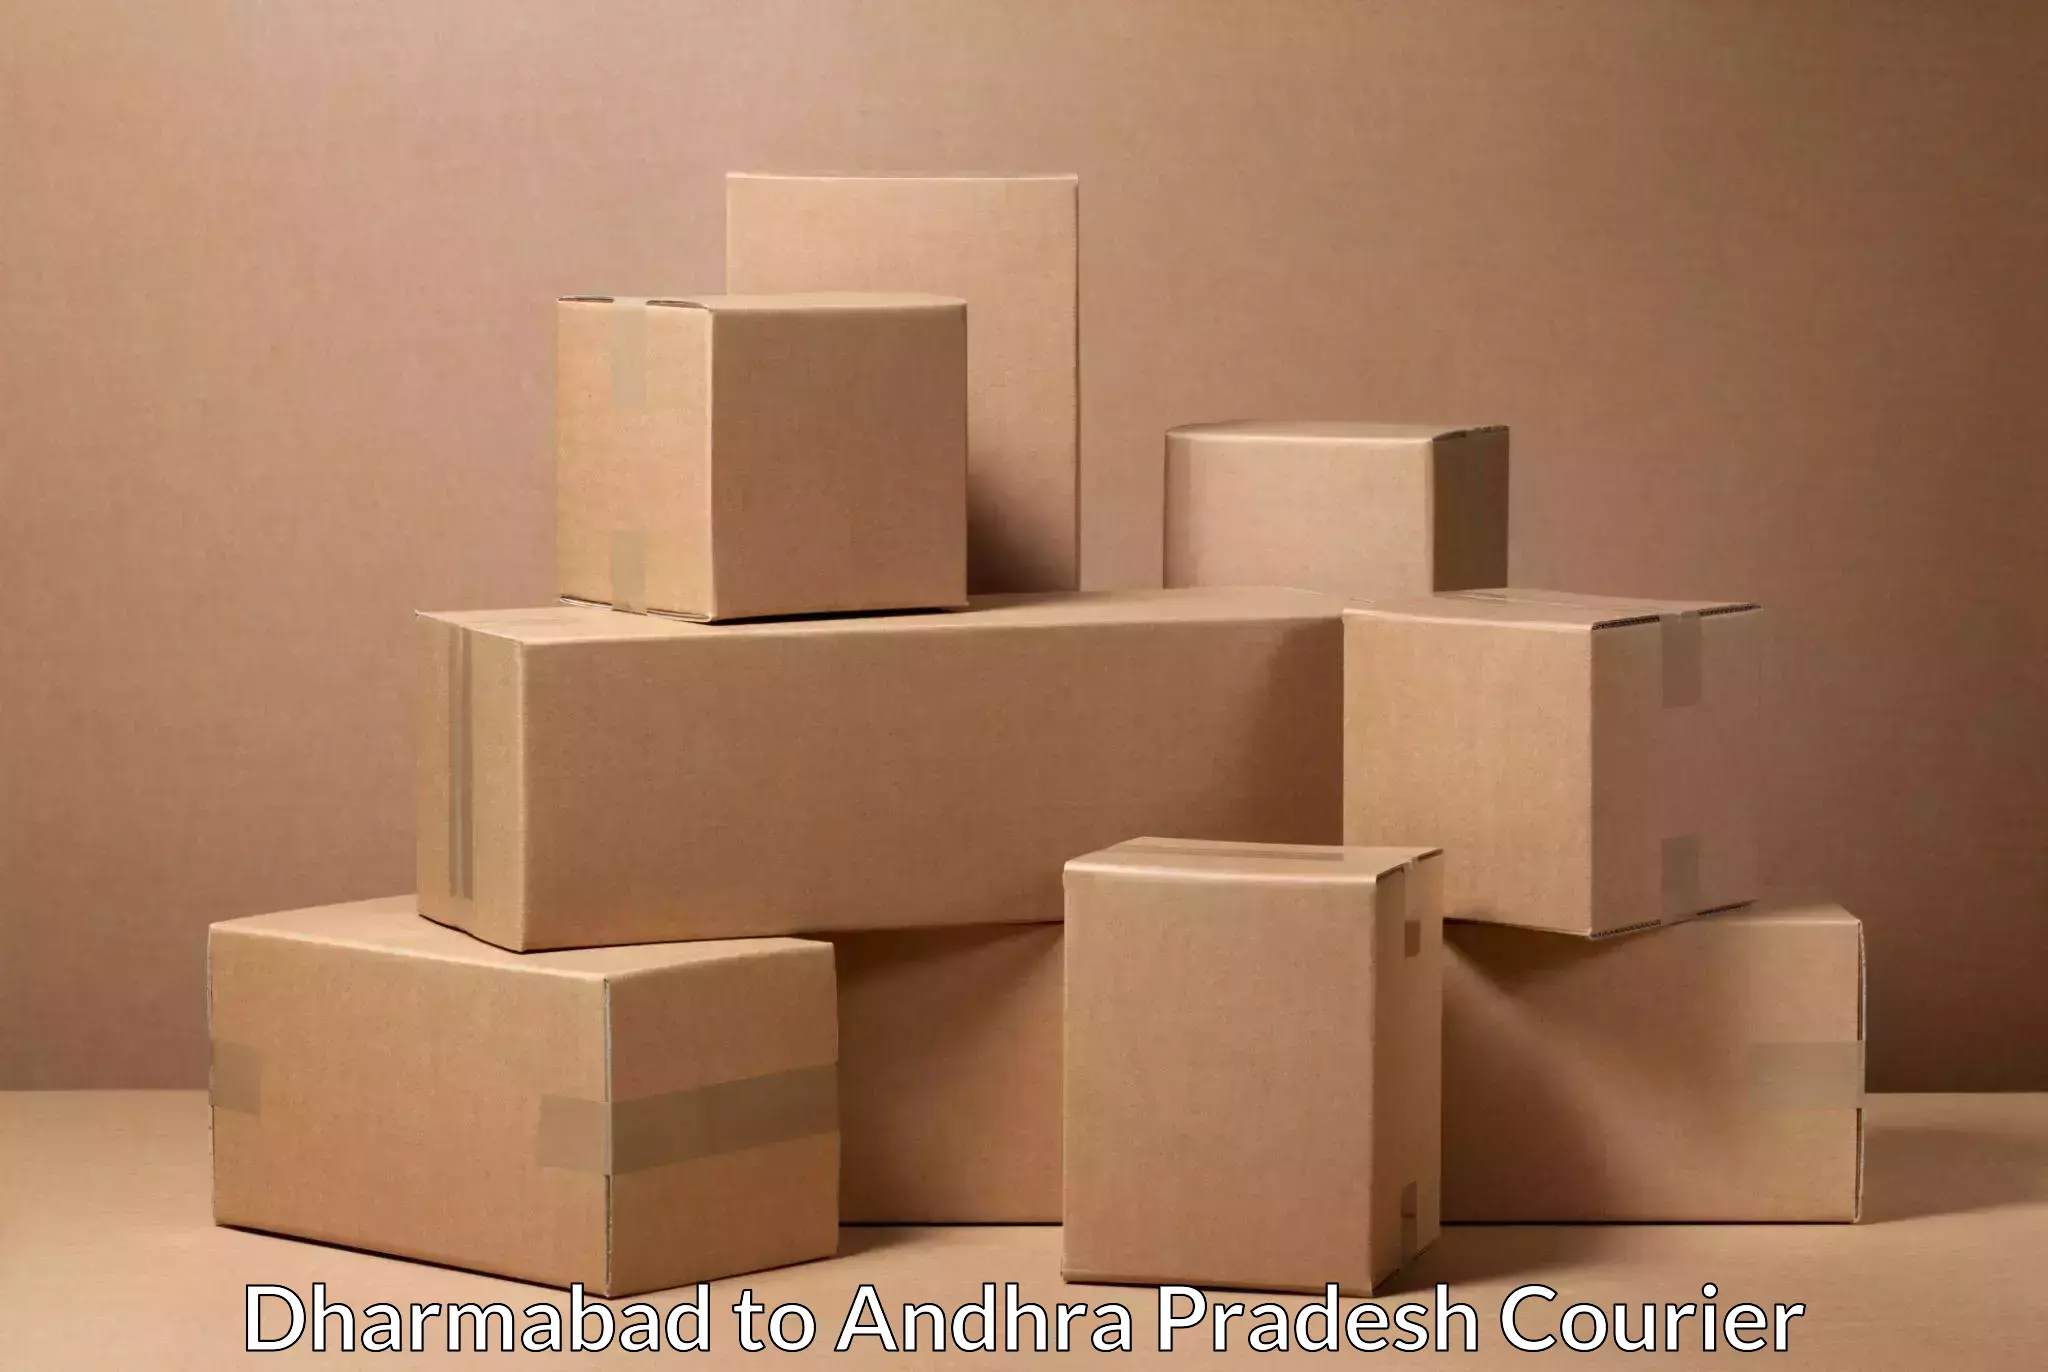 State-of-the-art courier technology Dharmabad to Naupada